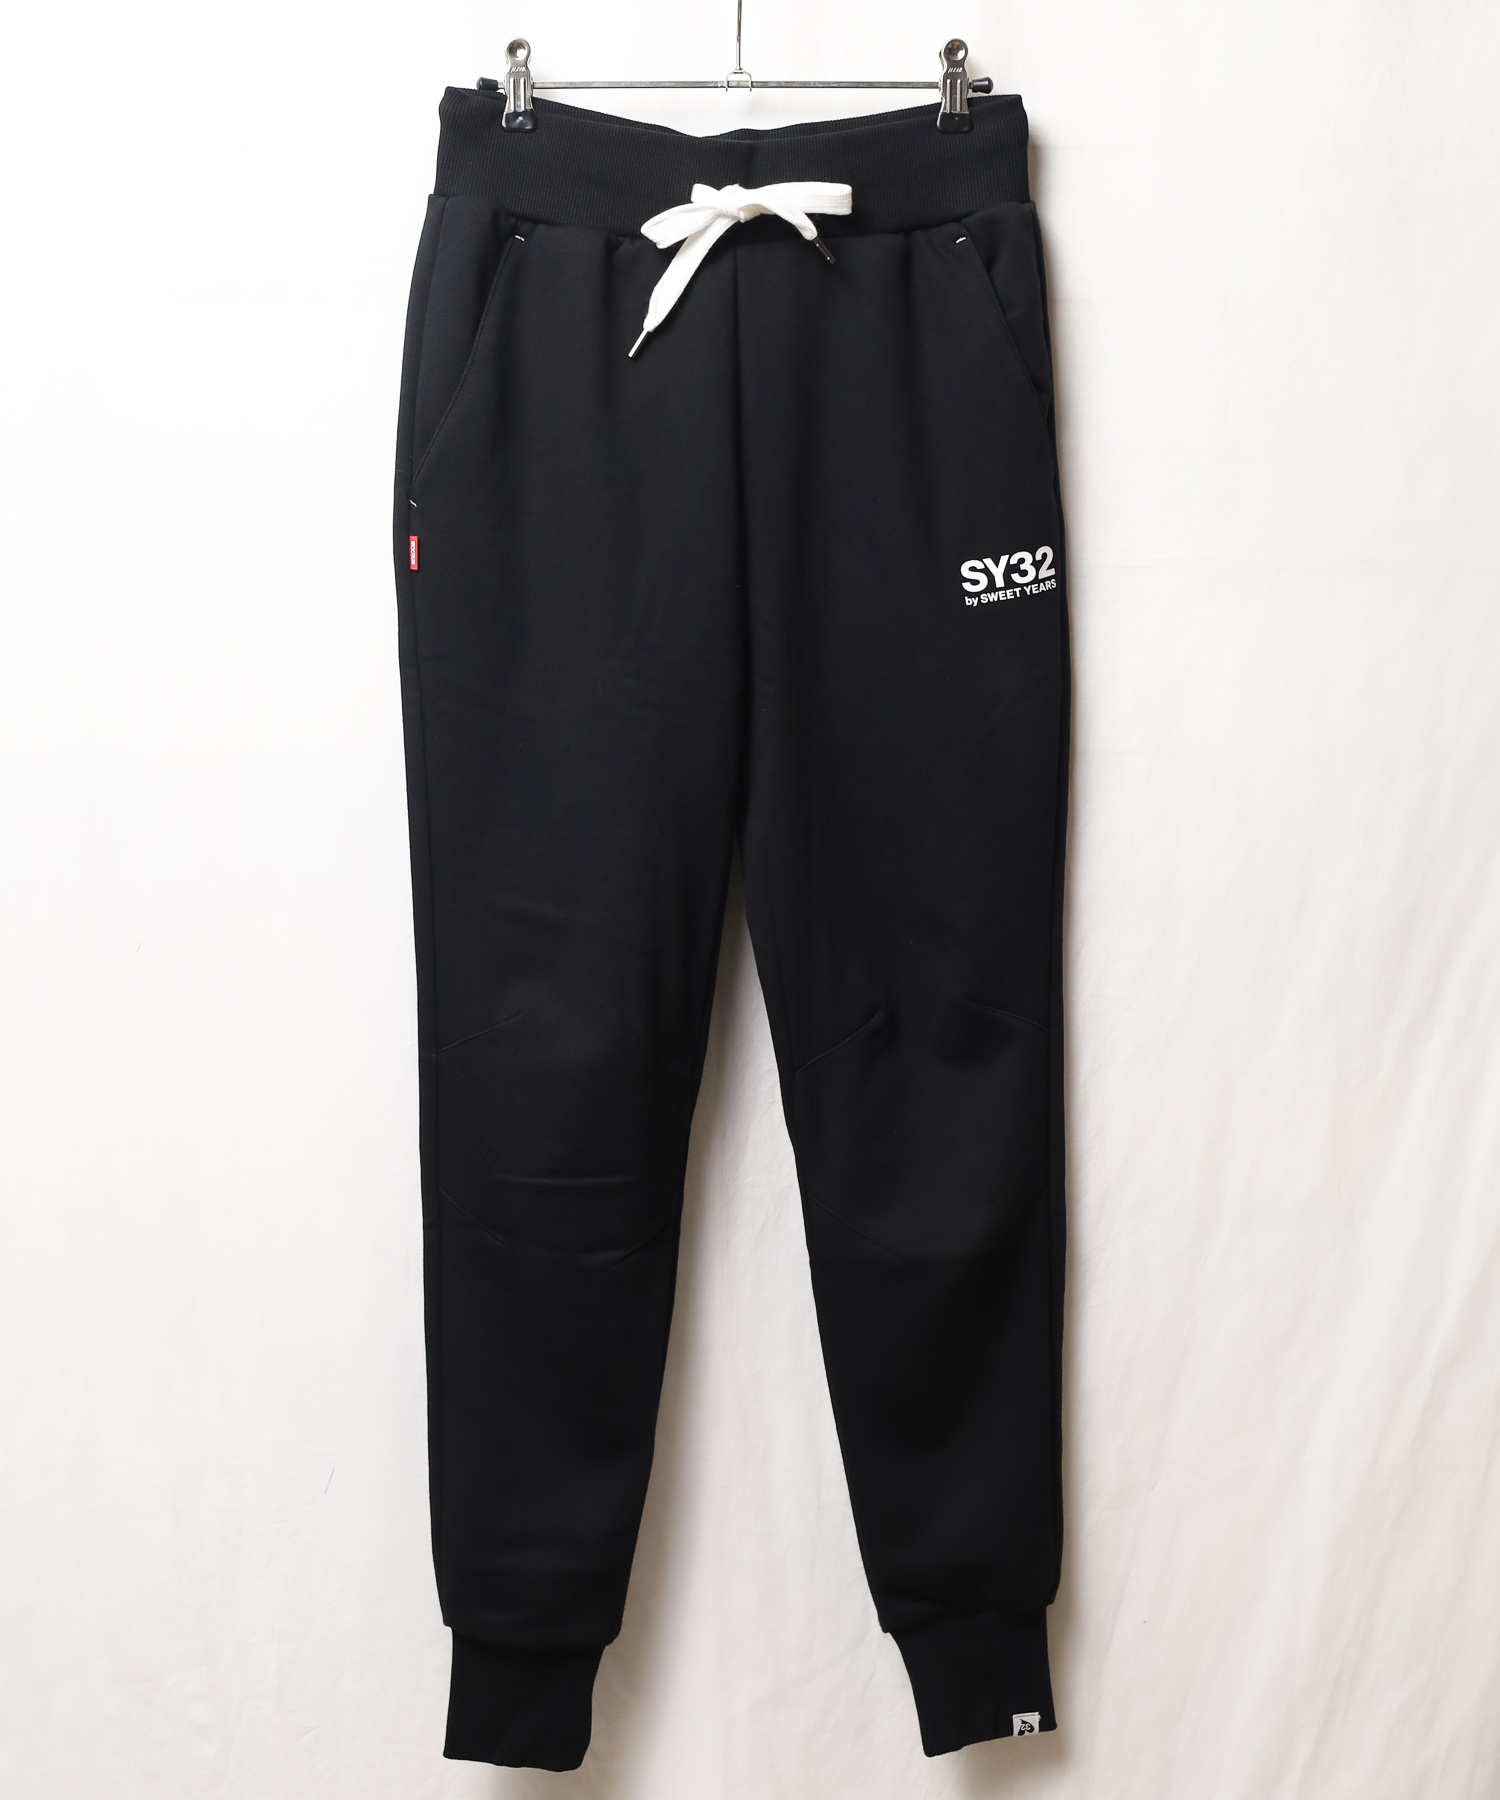 73】【TNS1706】【SY32 by SWEET YEARS】BASIC SWEAT PANTS(504546393